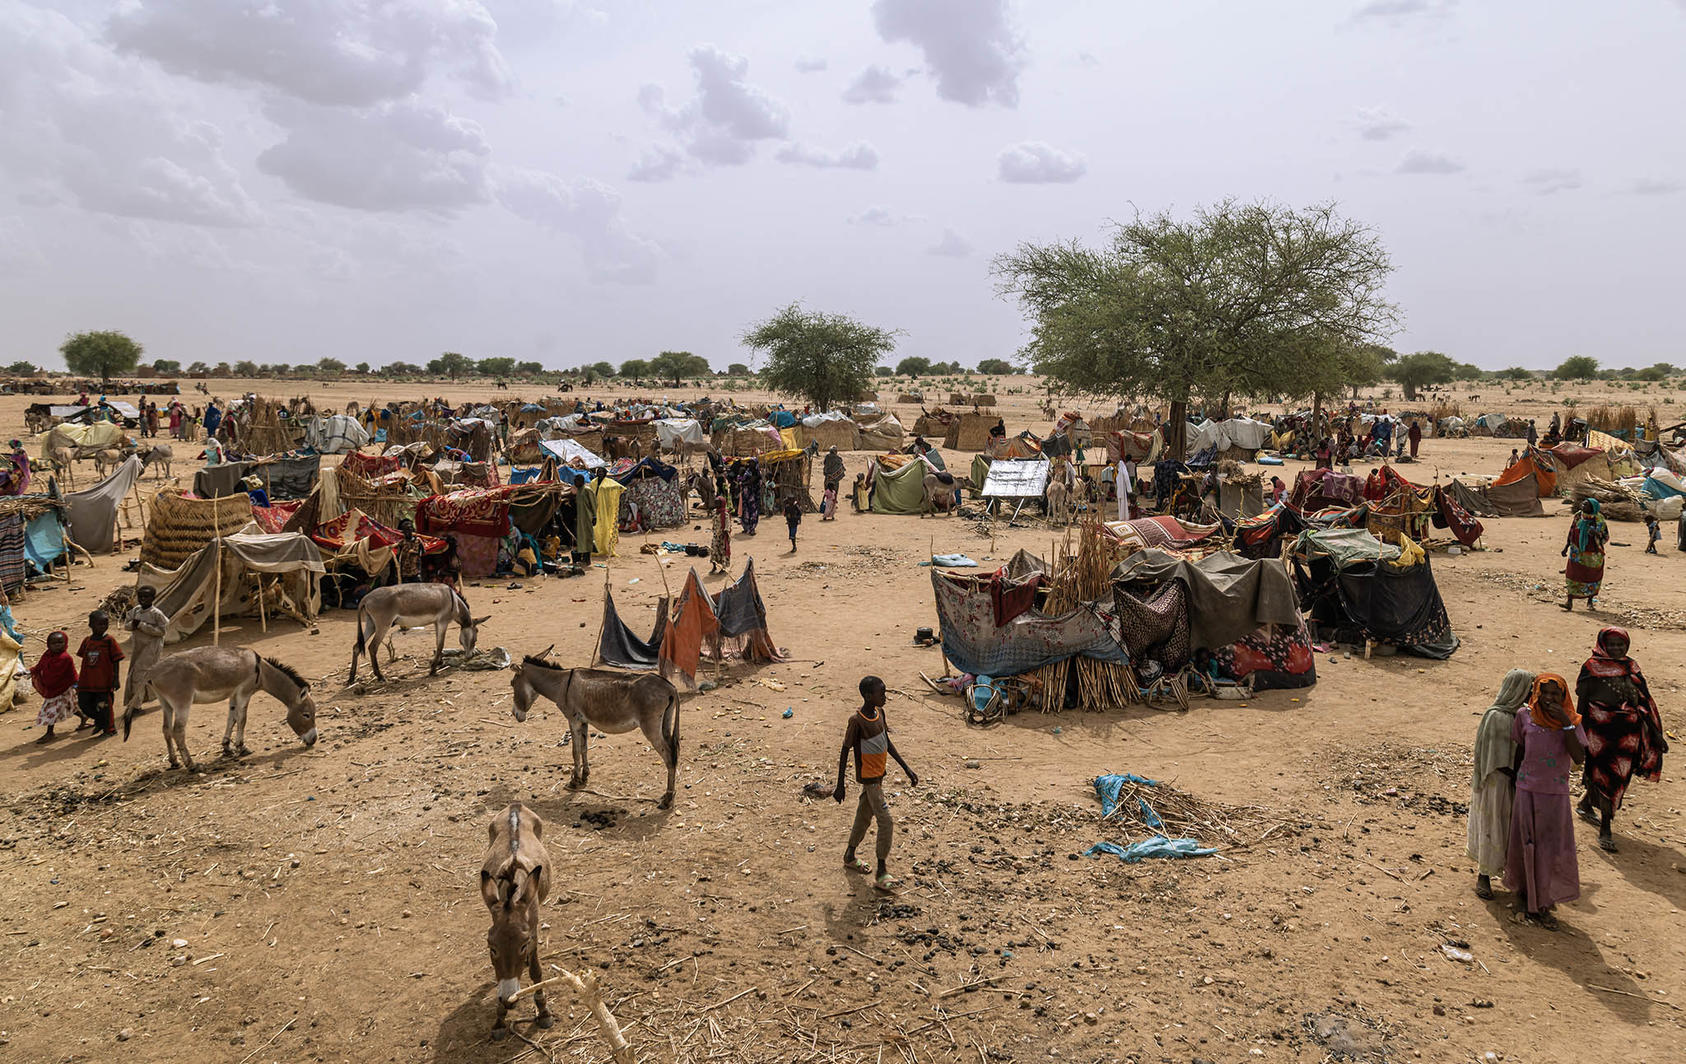 Sudanese who fled their country’s latest violence camp just over the border in Koufroune, Chad. Sudan’s new warfare has forced tens of thousands to flee into neighboring countries that are riven by their own violence. (Yagazie Emezi/The New York Times)